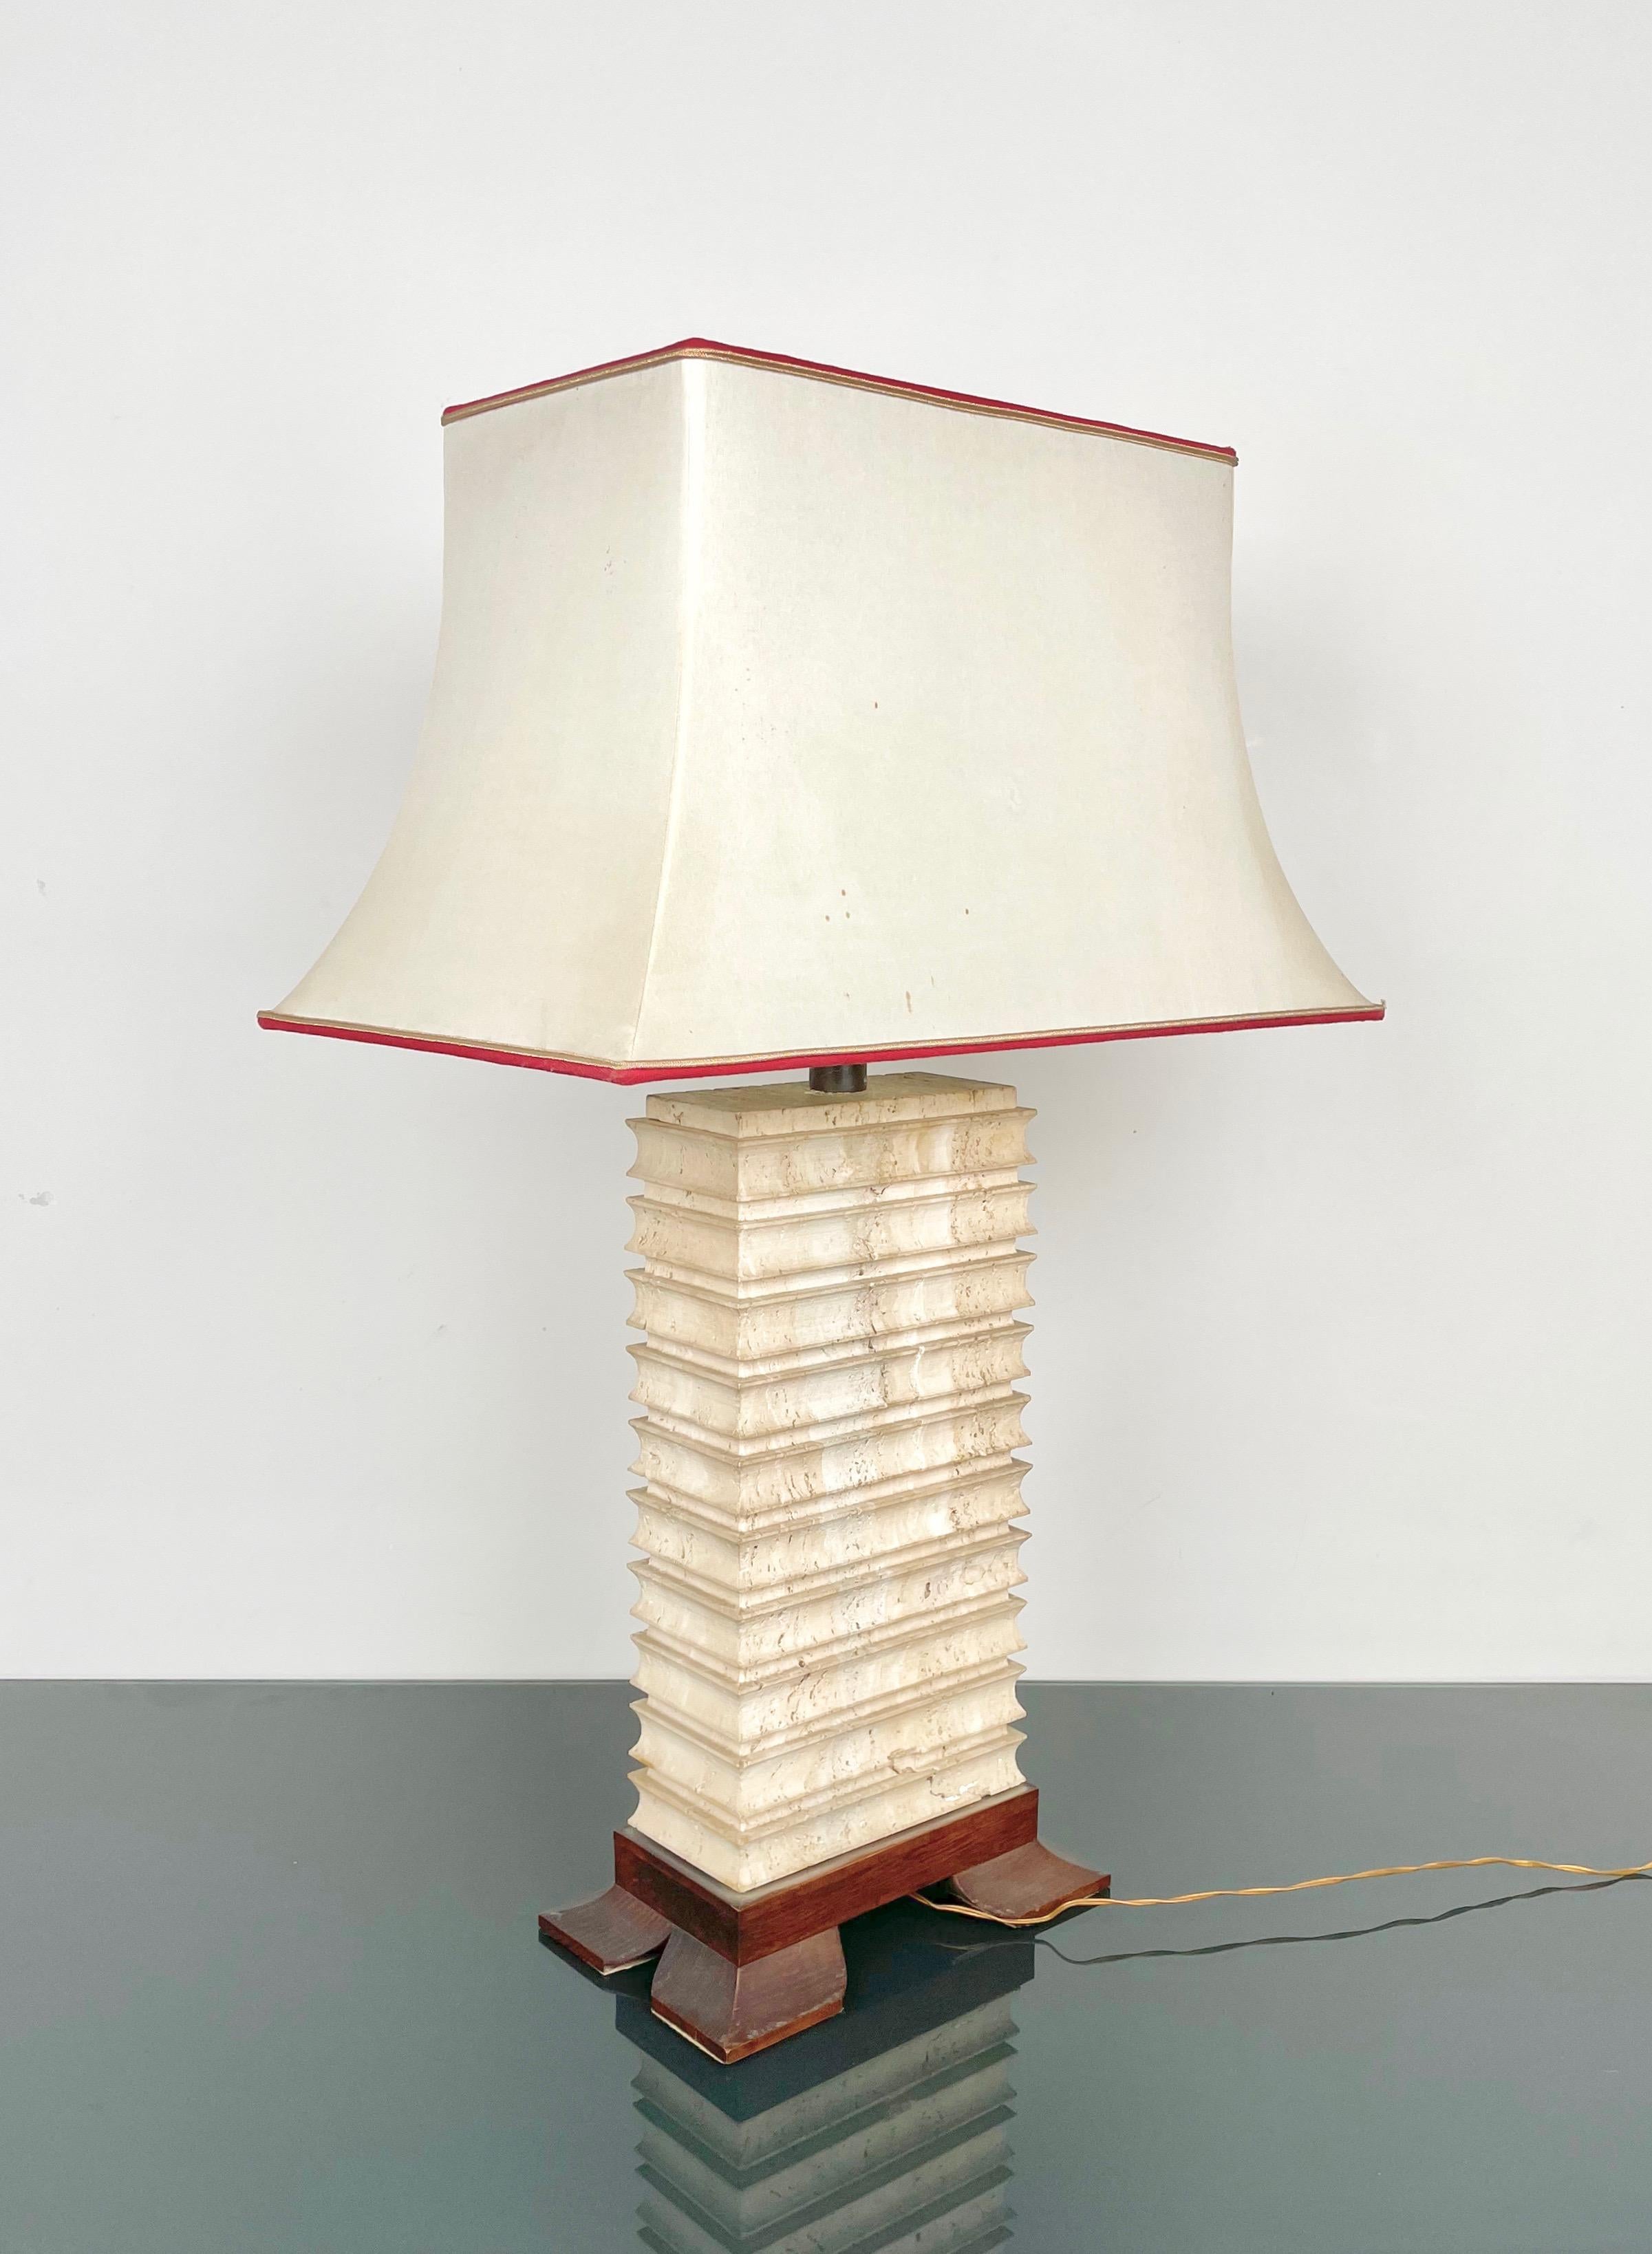 Pagoda Table Lamp in Travertine, Wood and Brass, Italy 1970s For Sale 1